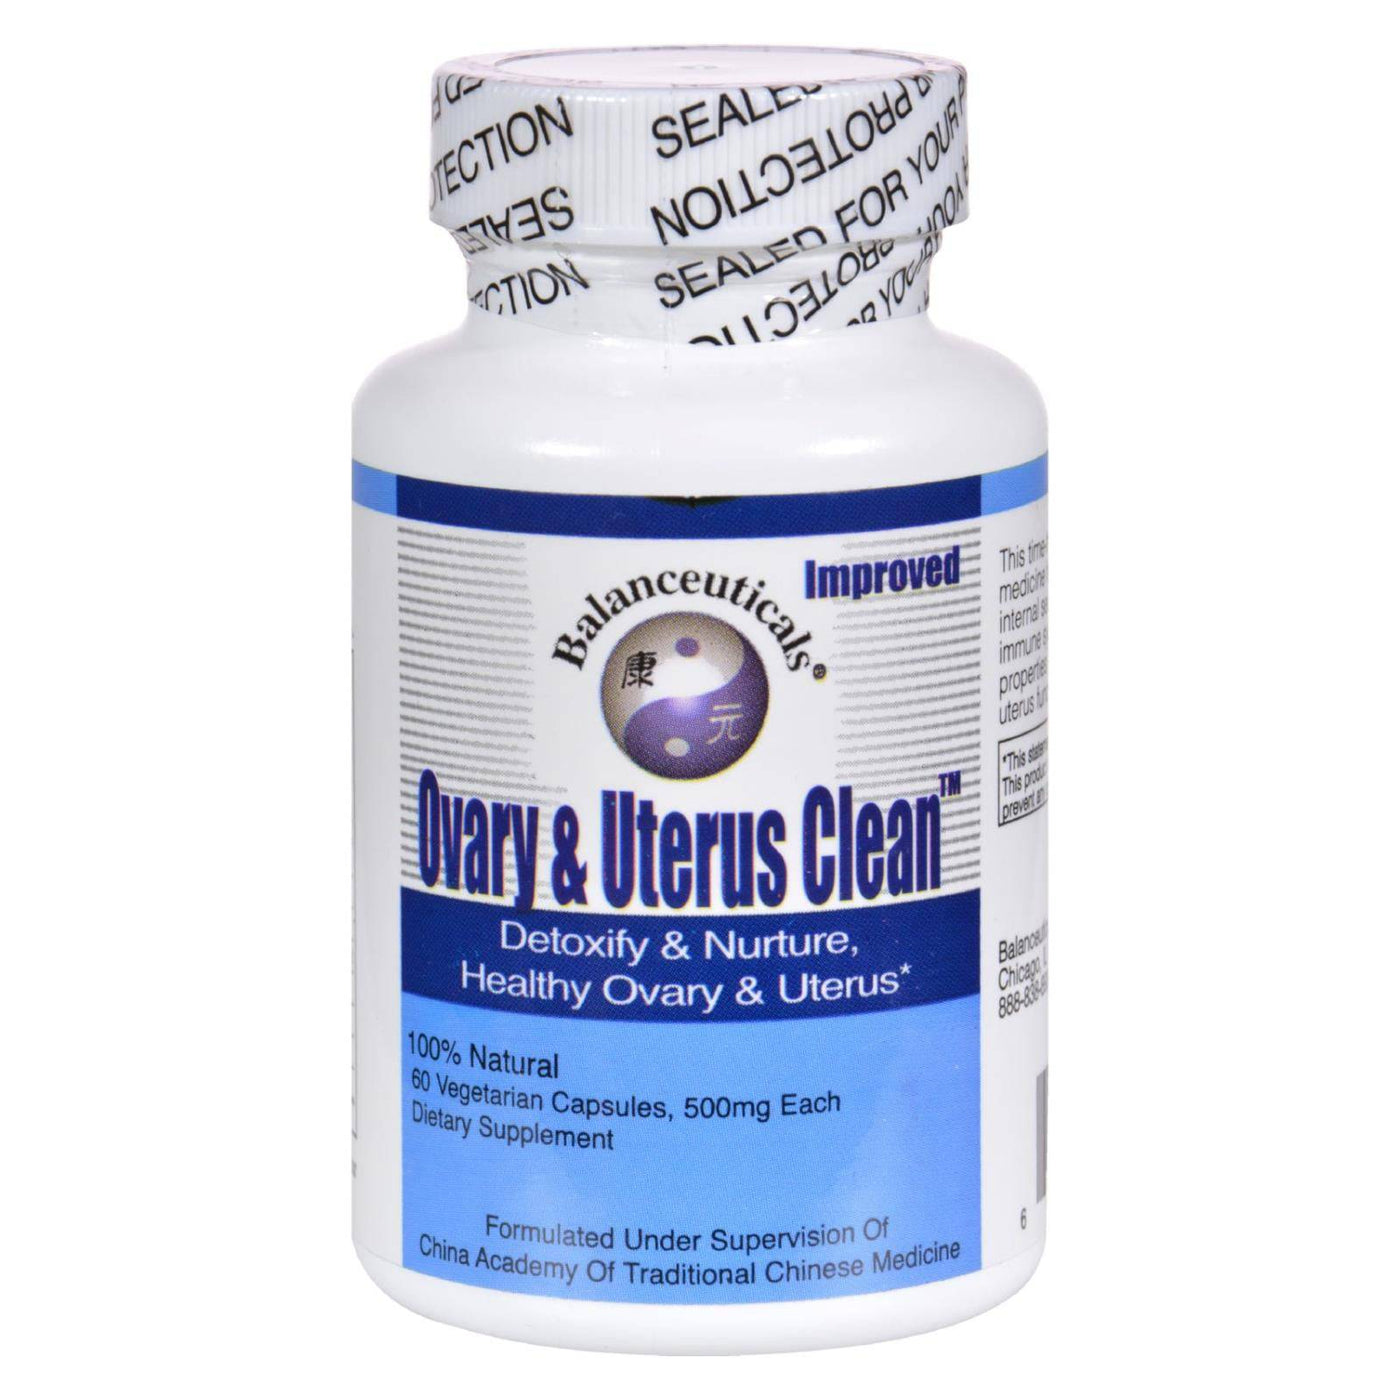 Balanceuticals Ovary And Uterus Clean - 500 Mg - 60 Capsules | OnlyNaturals.us